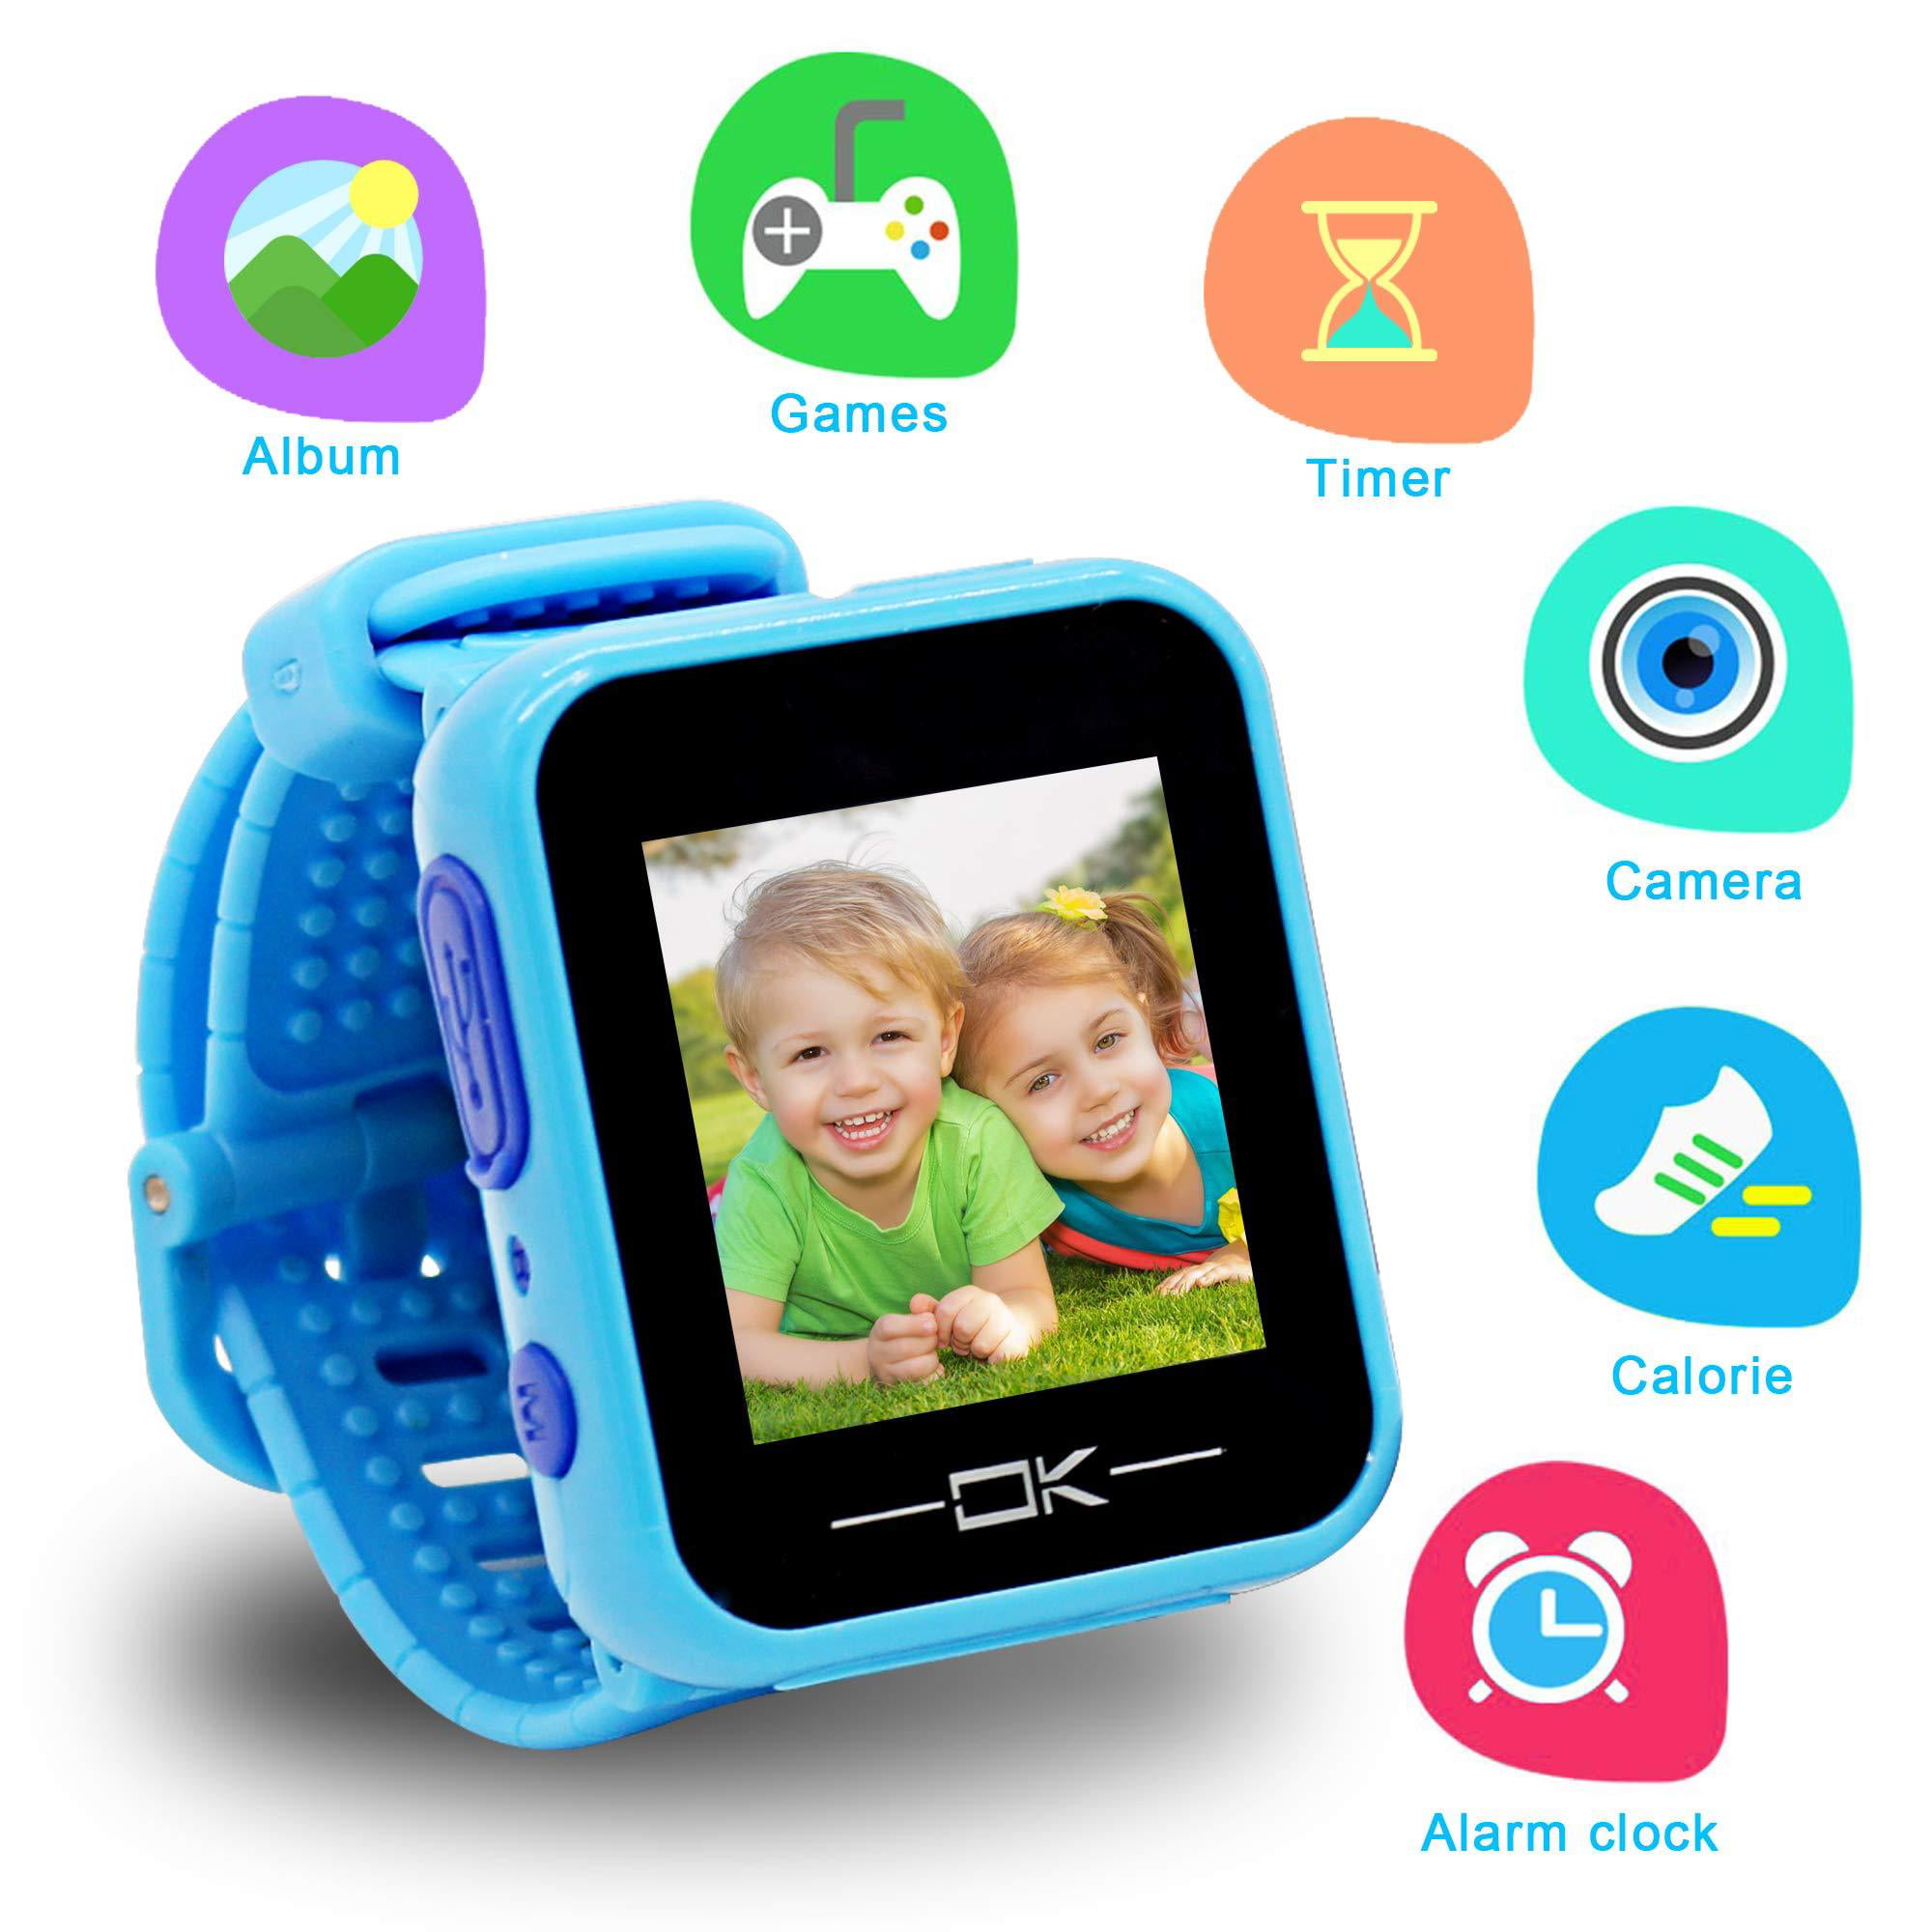 electronic toys for 3 year old boys